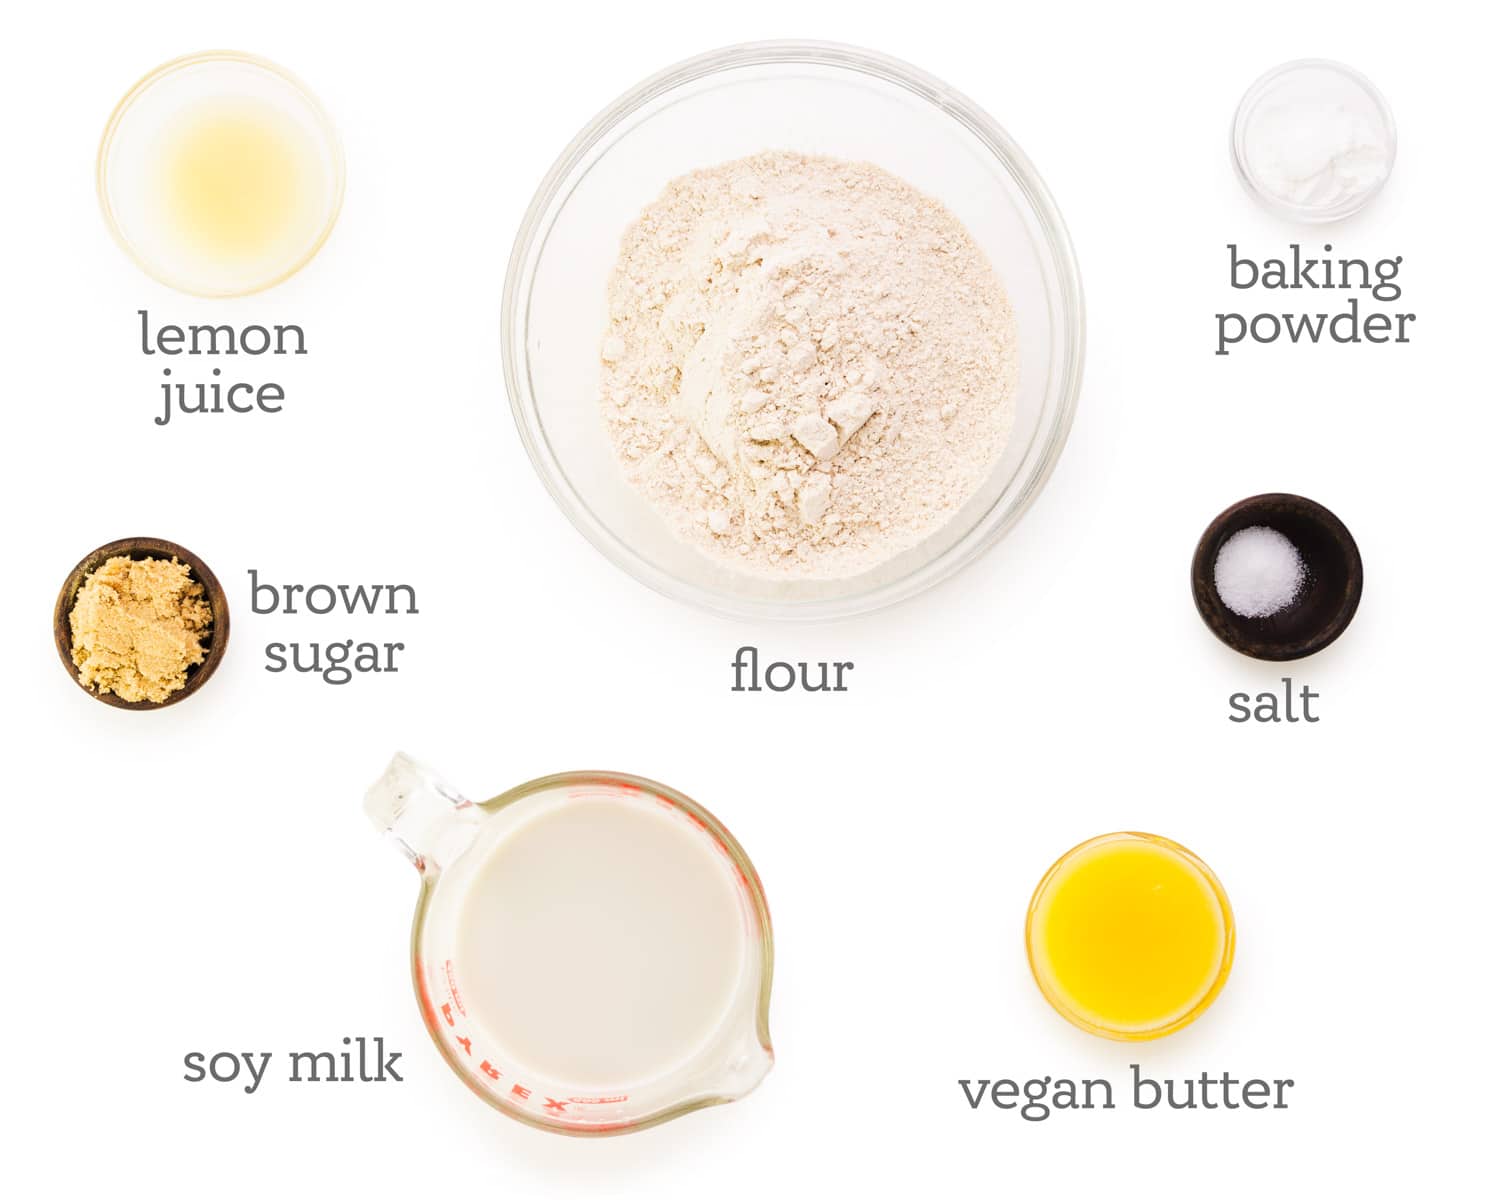 Ingredients are laid out on a white table. The labels next to each ingredient reads, flour, baking powder, salt, vegan butter, vegan milk, brown sugar, and lemon juice.